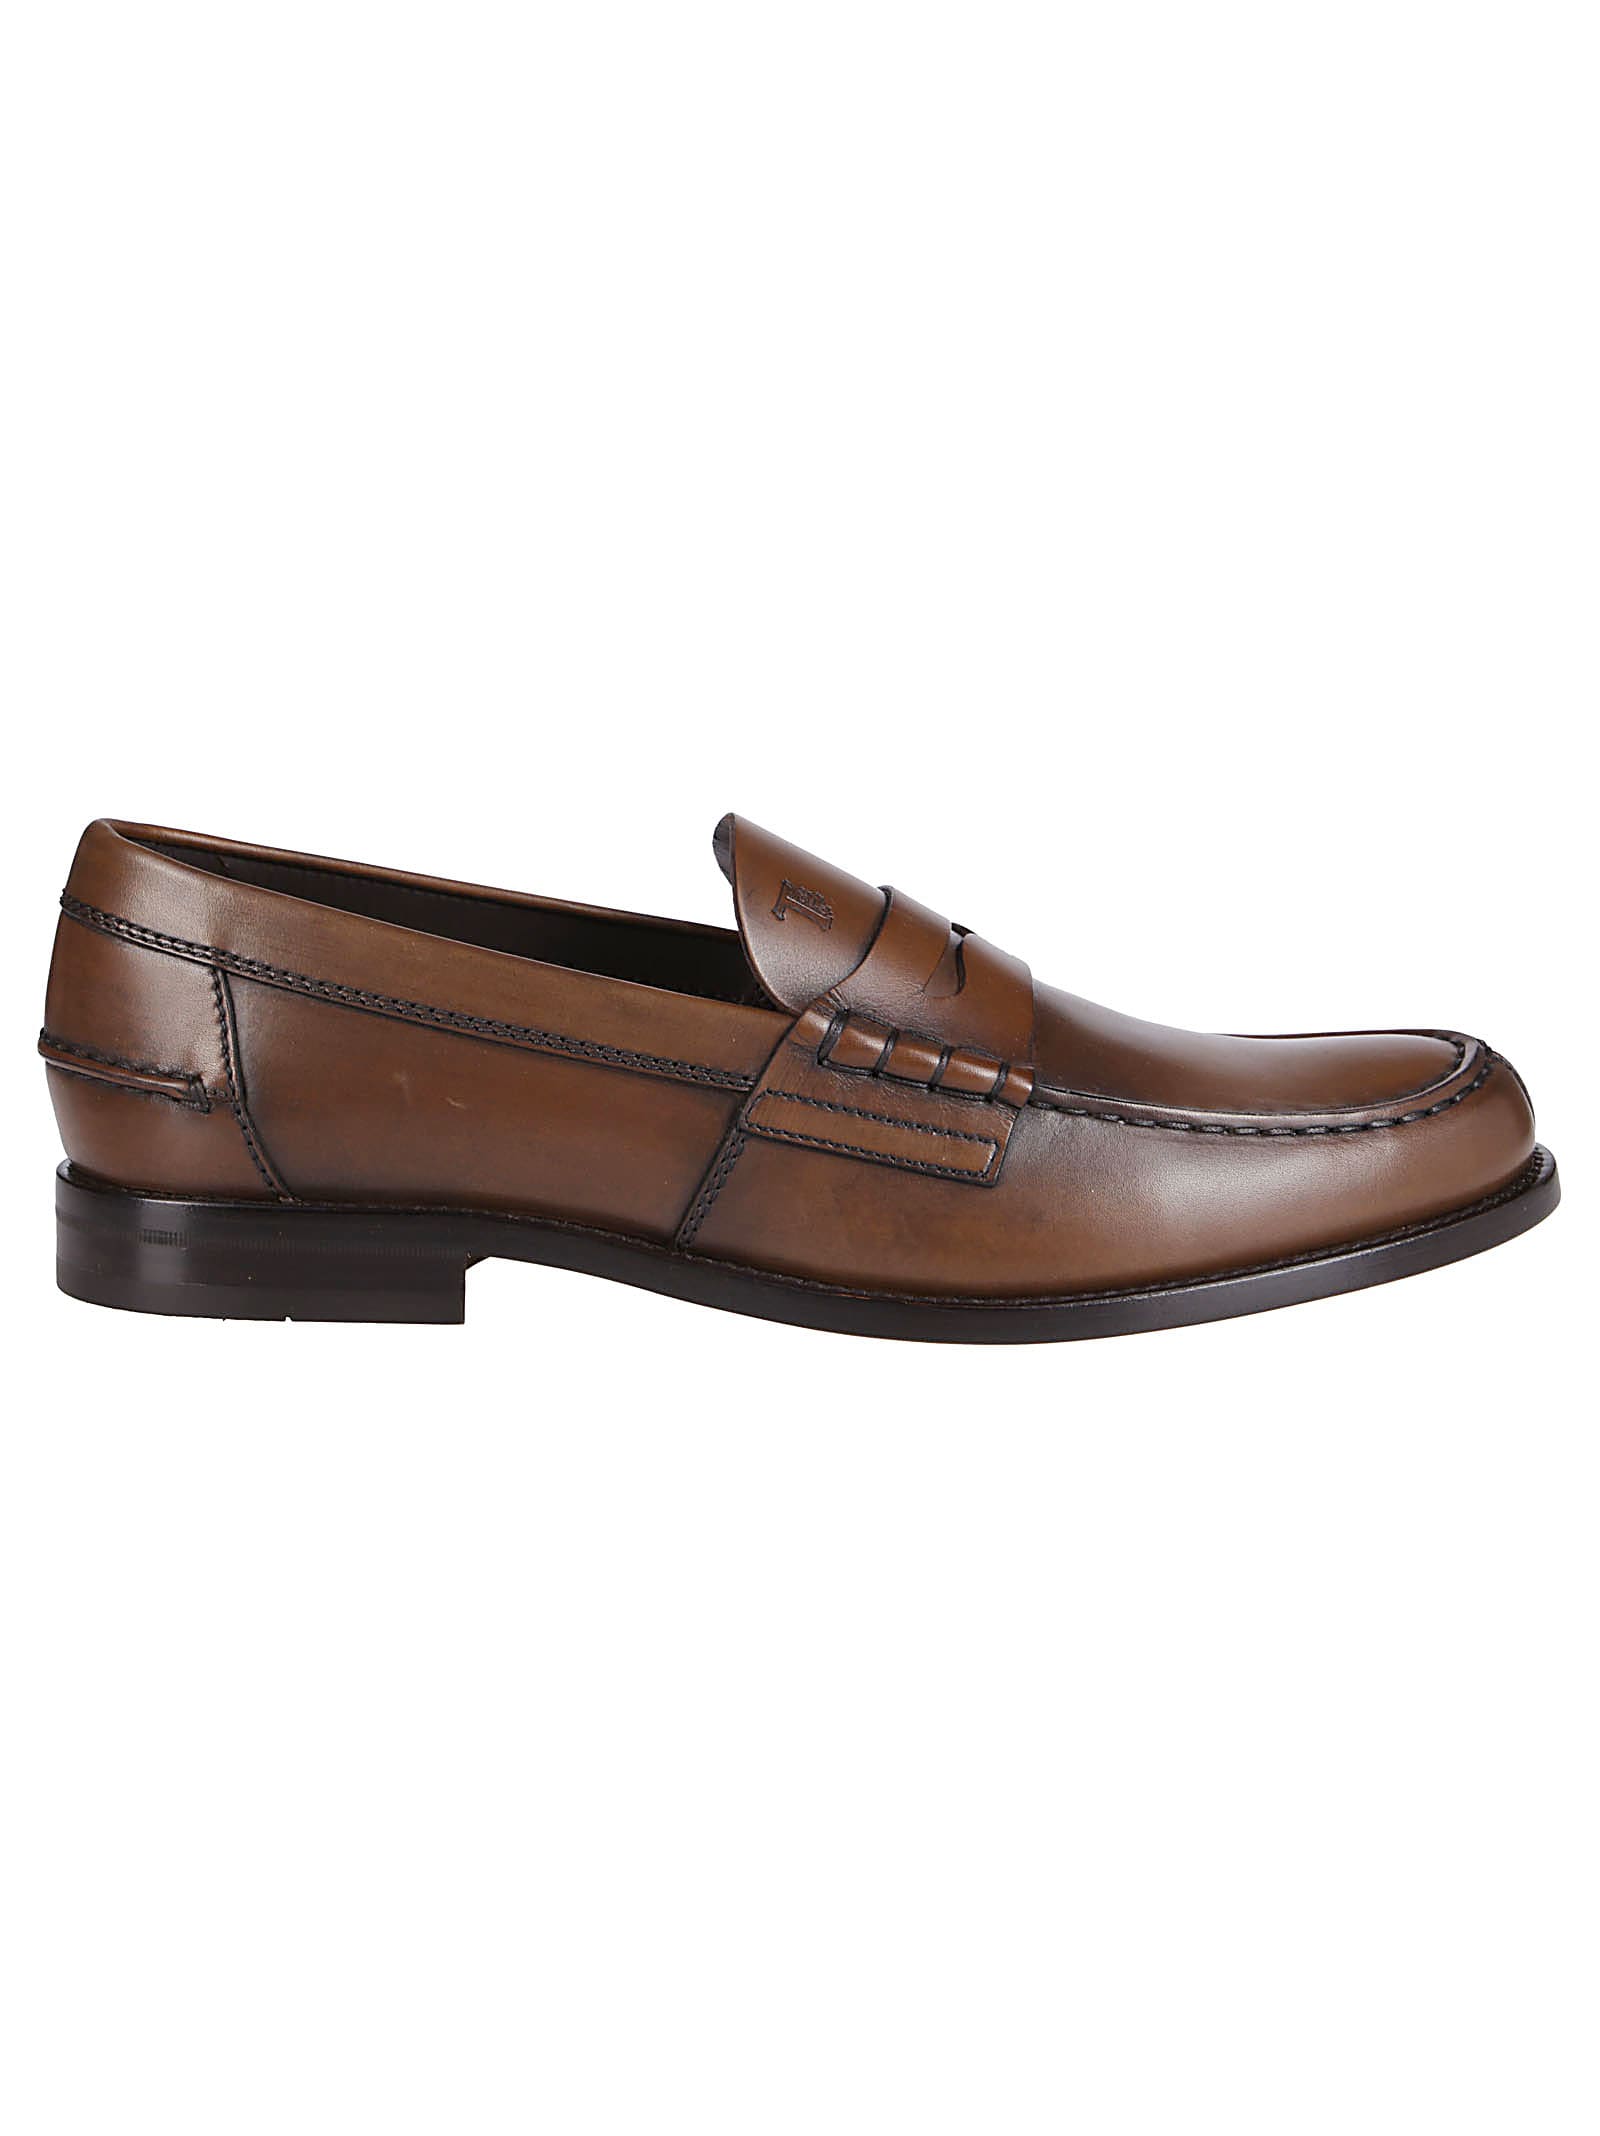 TOD'S BROWN LEATHER PENNY LOAFERS,11262510